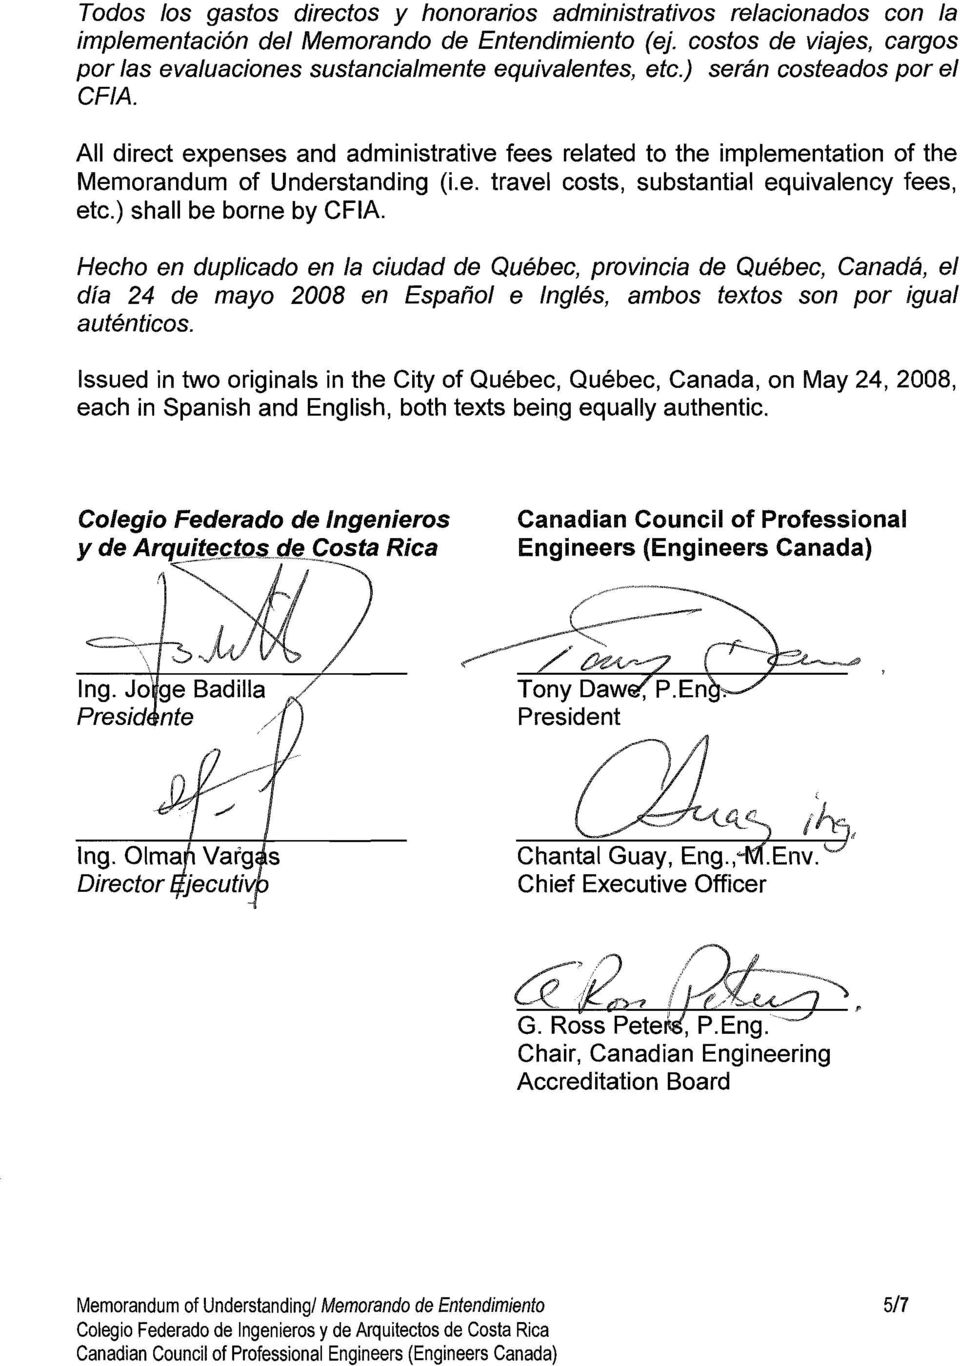 All direct expenses and administrative fees related to the implementation of the Memorandum of Understanding (i.e. travel costs, substantial equivalency fees, etc.) shall be borne by CFIA.